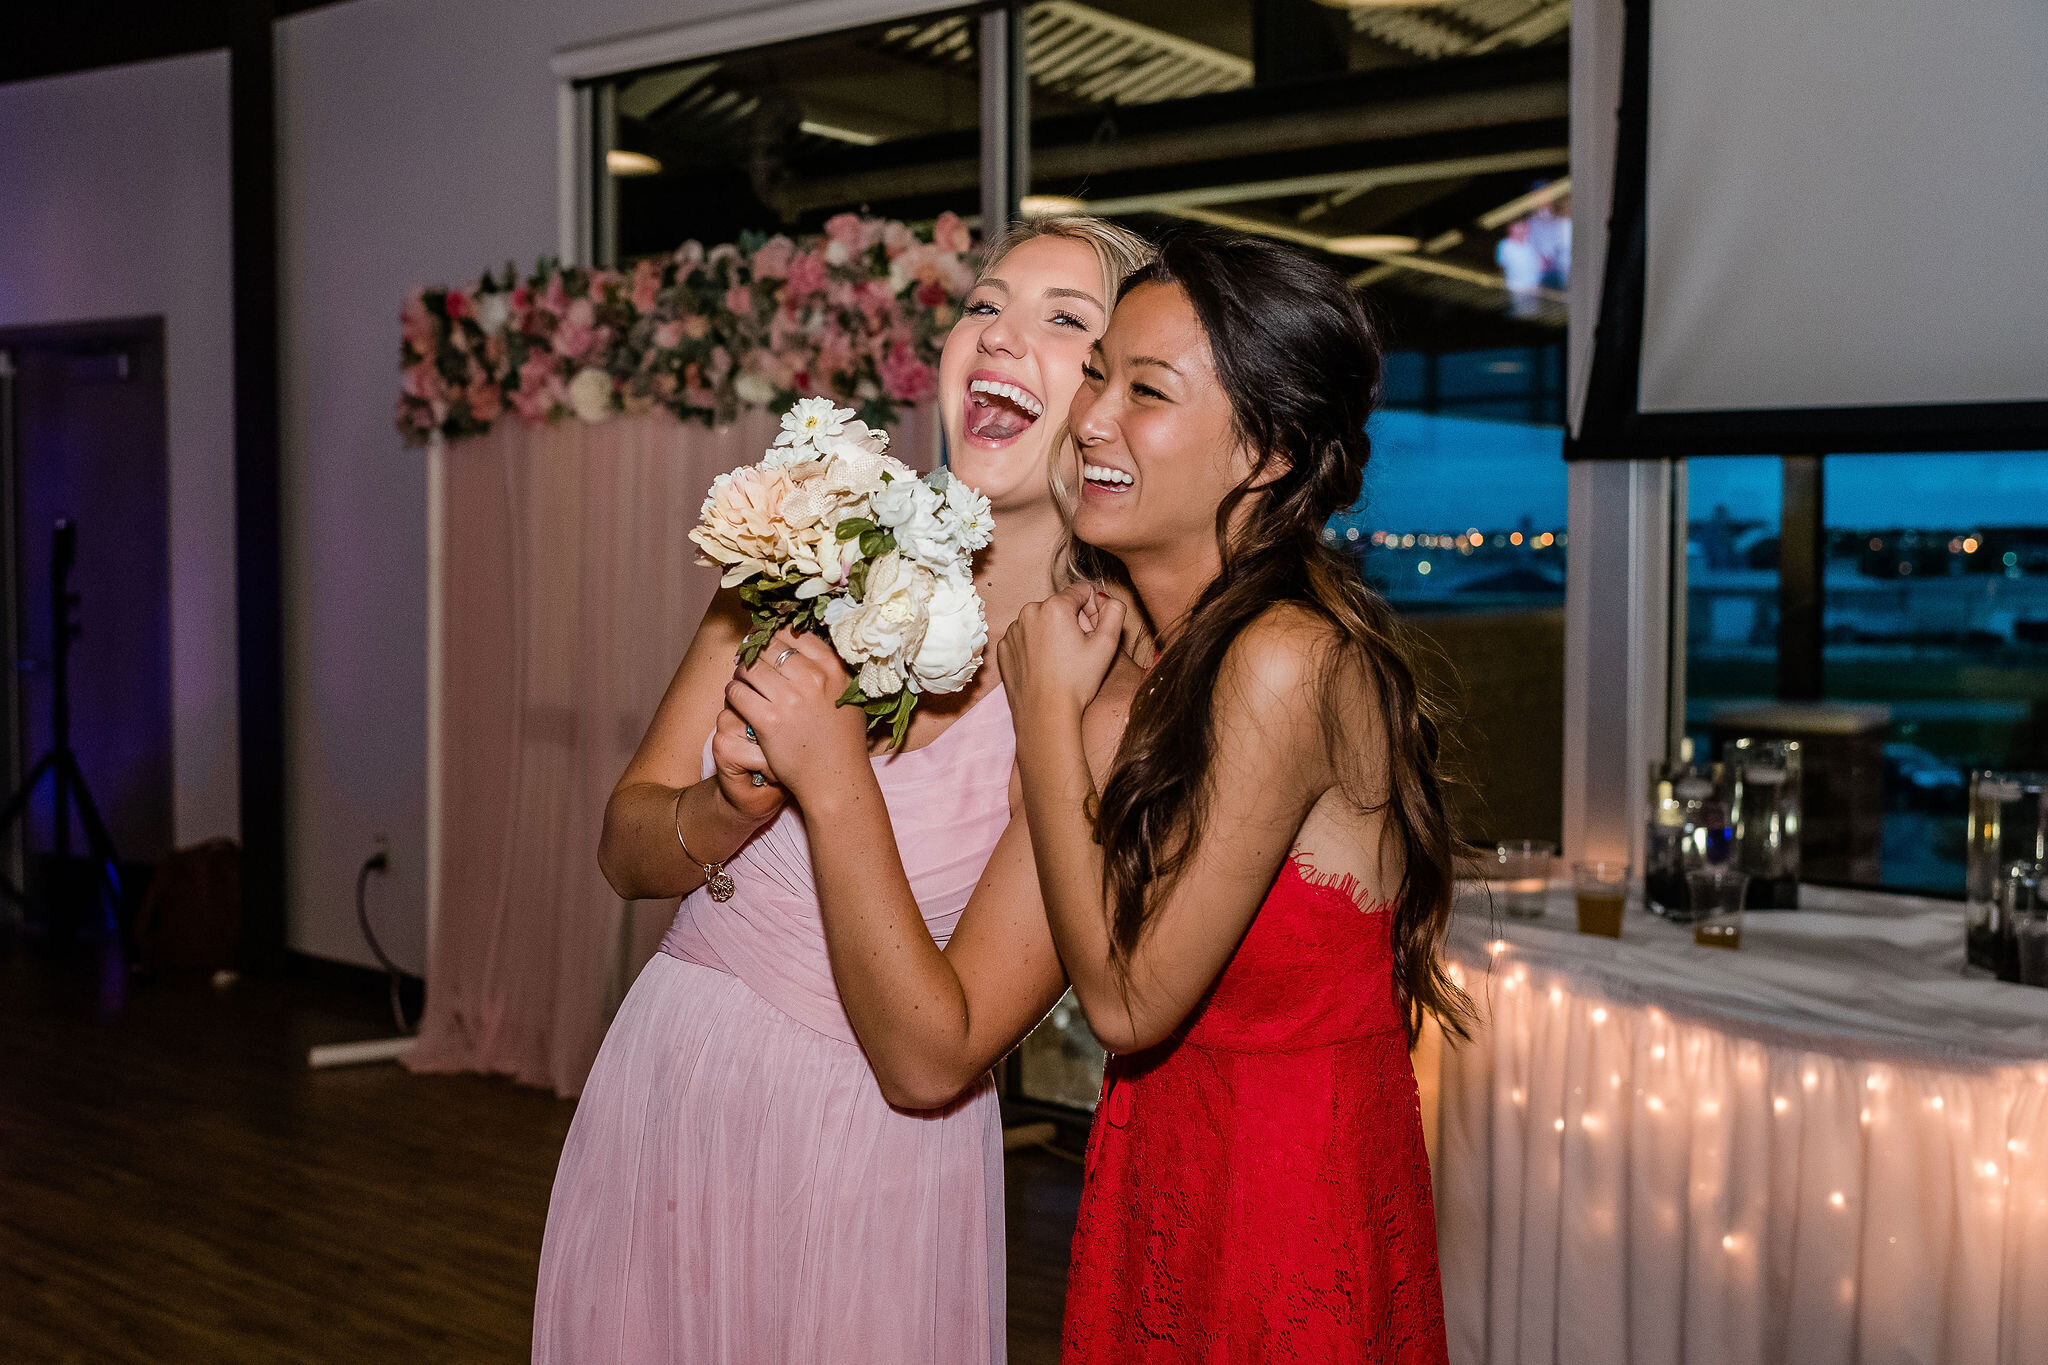 Bridesmaid cheers with a friend after catching the bride's bouquet